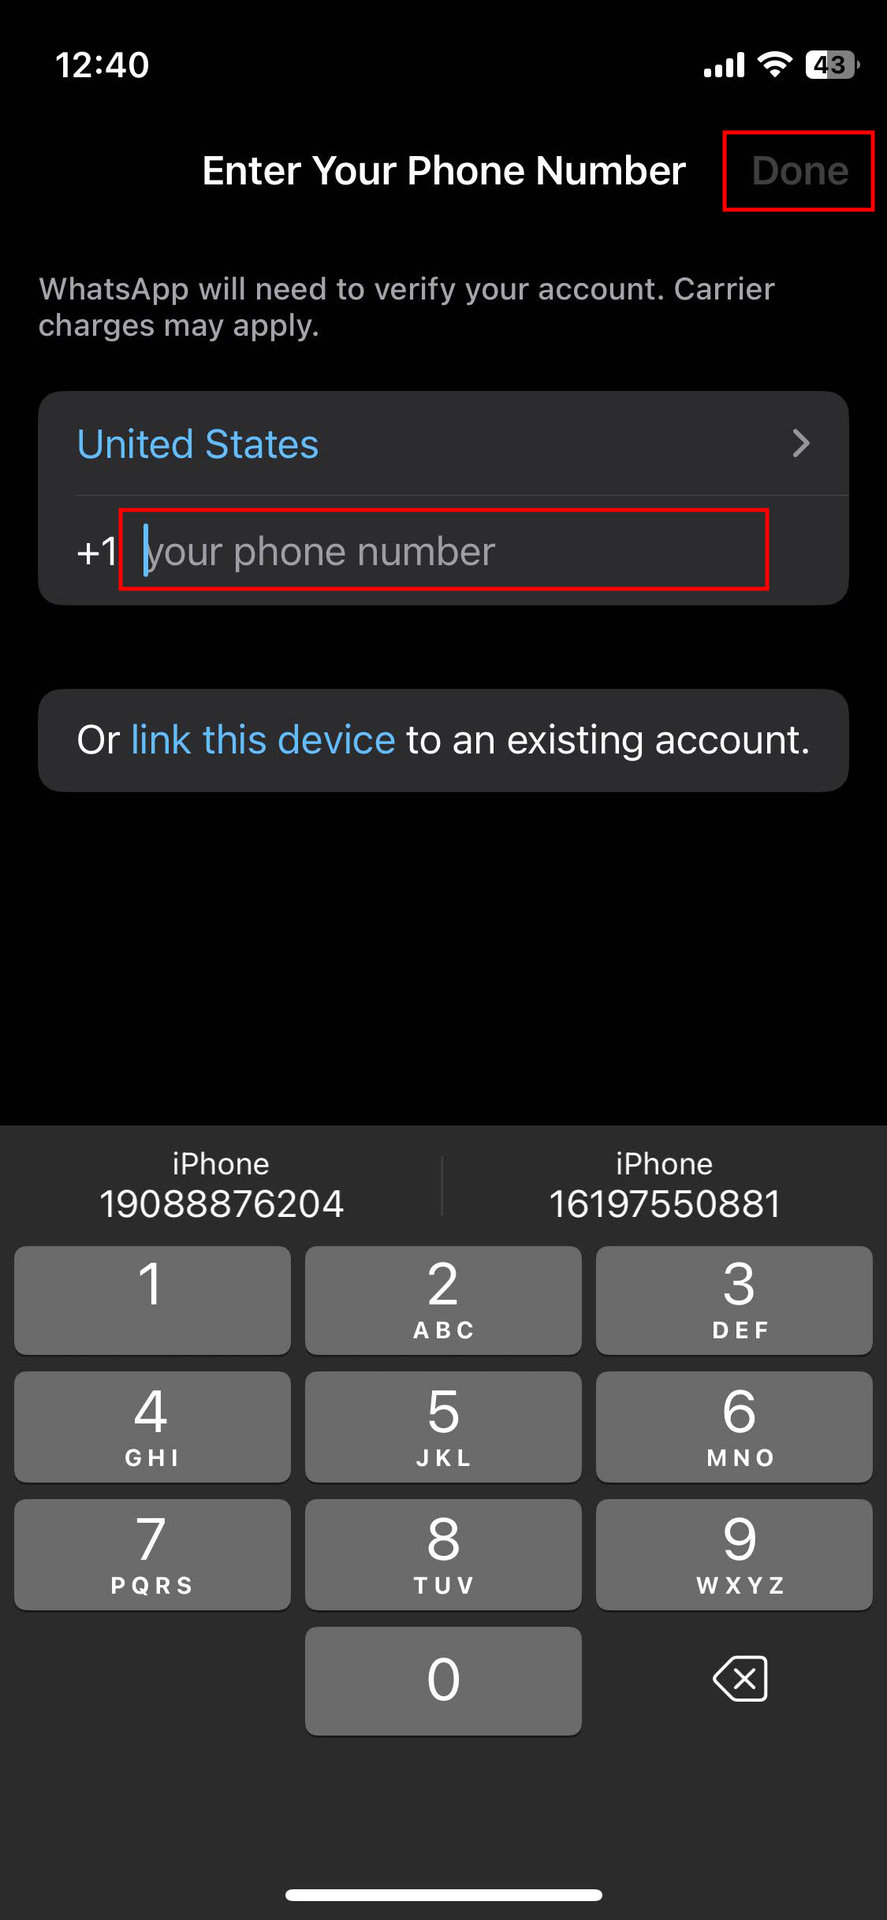 How to set up iPhone WhatsApp using a landline phone (2)